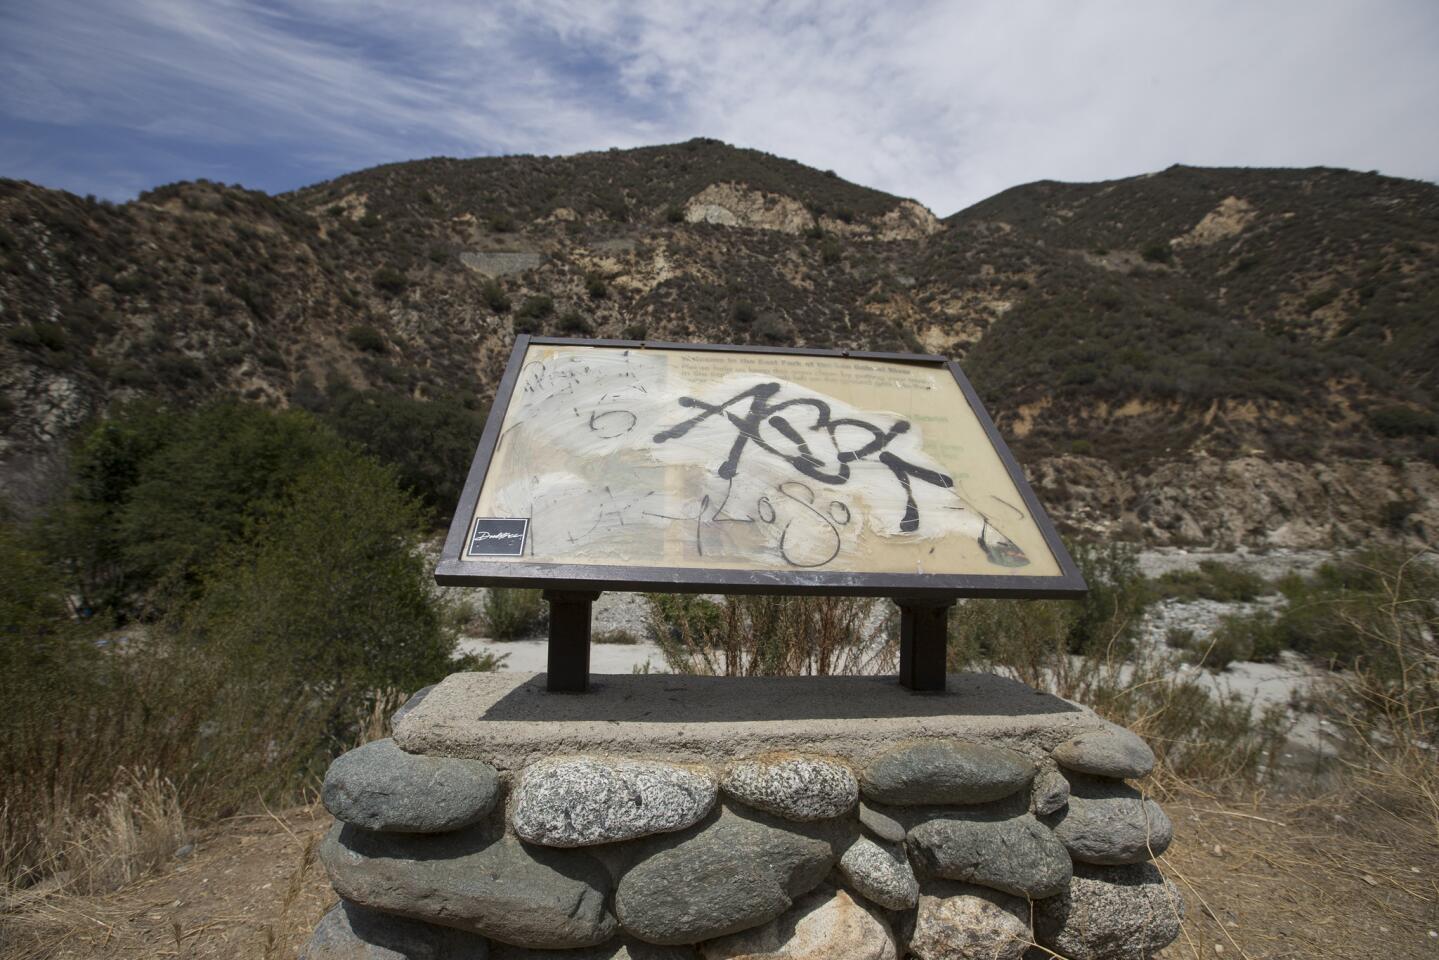 A grafitti-covered sign provides information about the national monument and asks visitors to remove their trash.